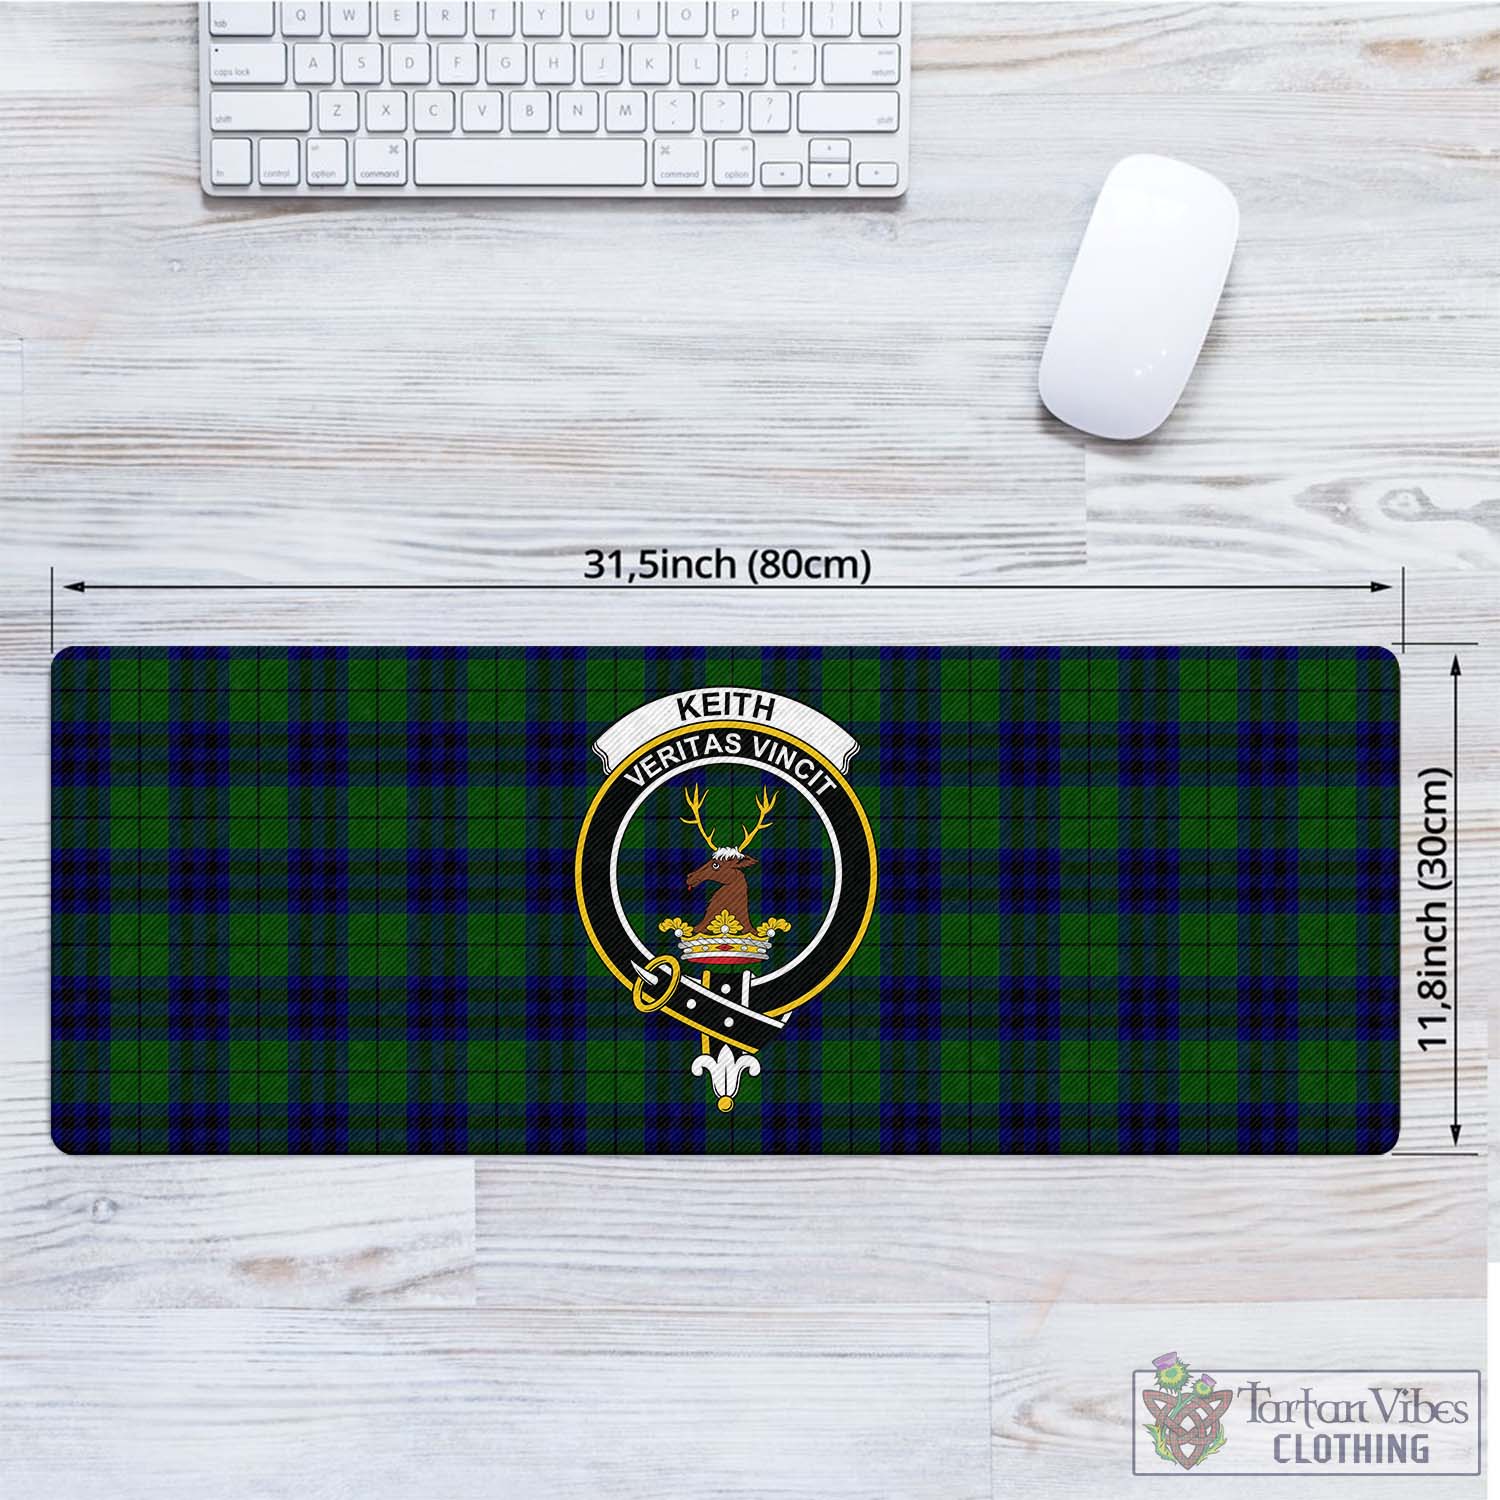 Tartan Vibes Clothing Keith Modern Tartan Mouse Pad with Family Crest